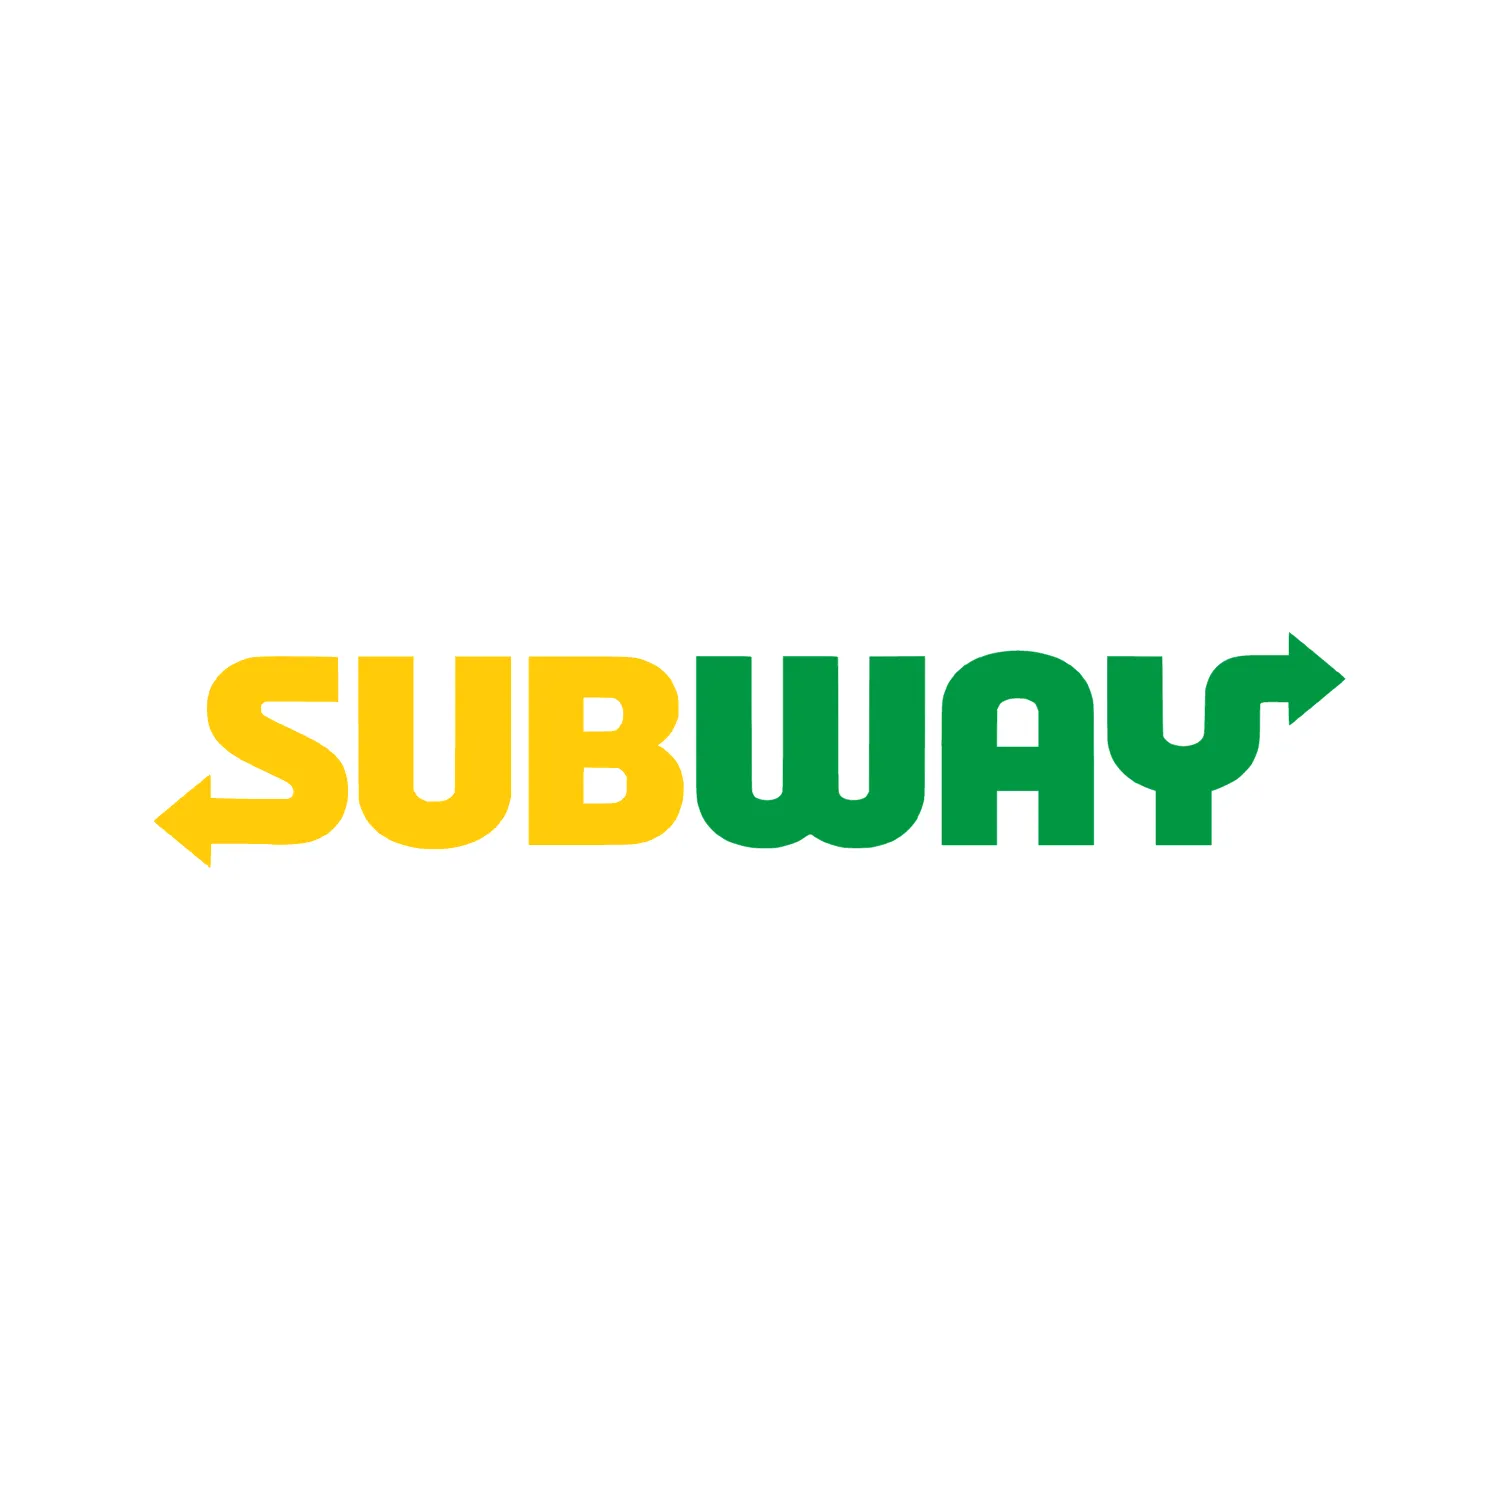 Database of SUBWAY Locations in the United States